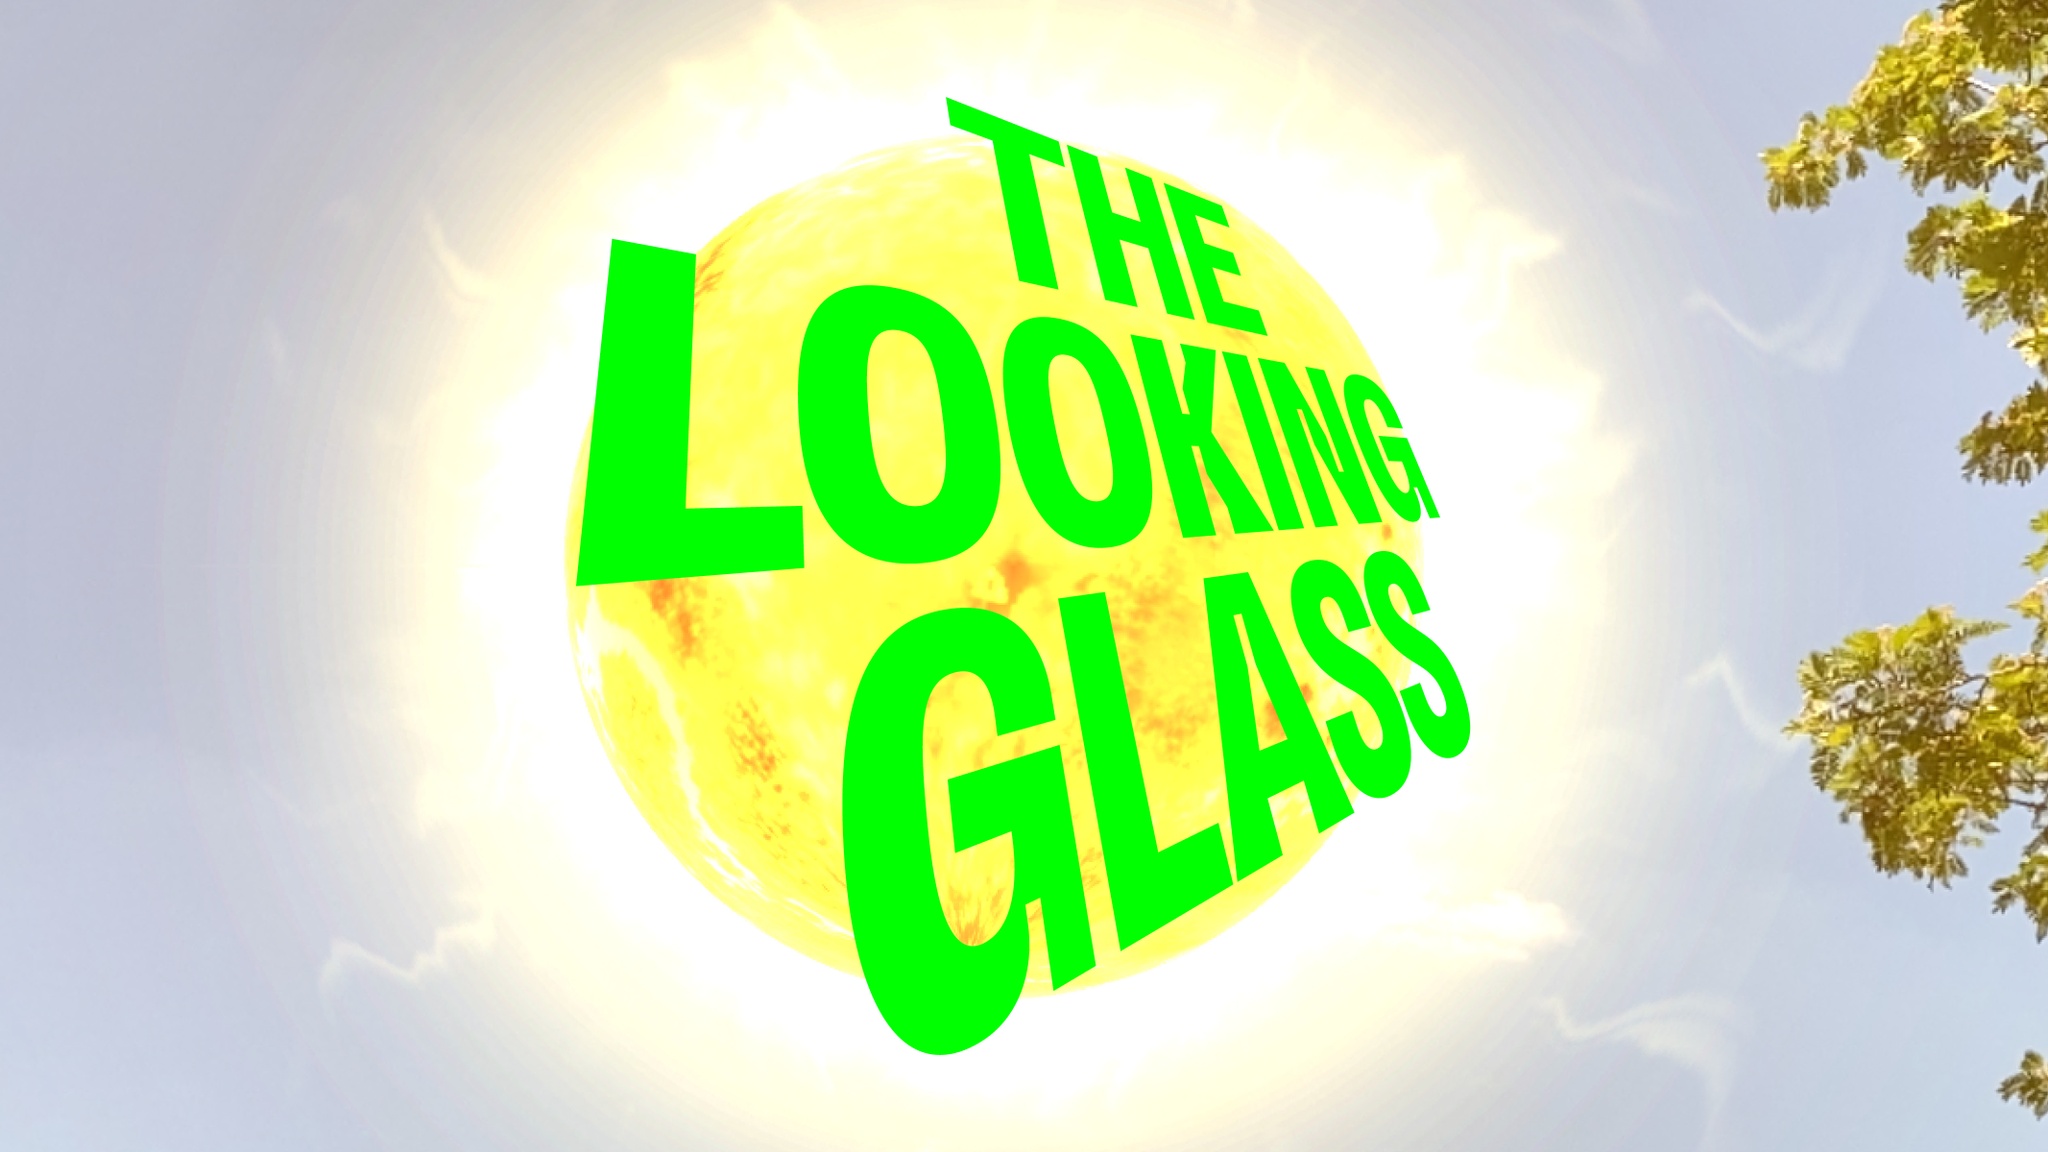 The exhibition title The Looking Glass superimposed over a blue sky with a boiling, radiating yellow sun at its center. The text is slanted on a diagonal over the image to give the illusion of depth in the image.